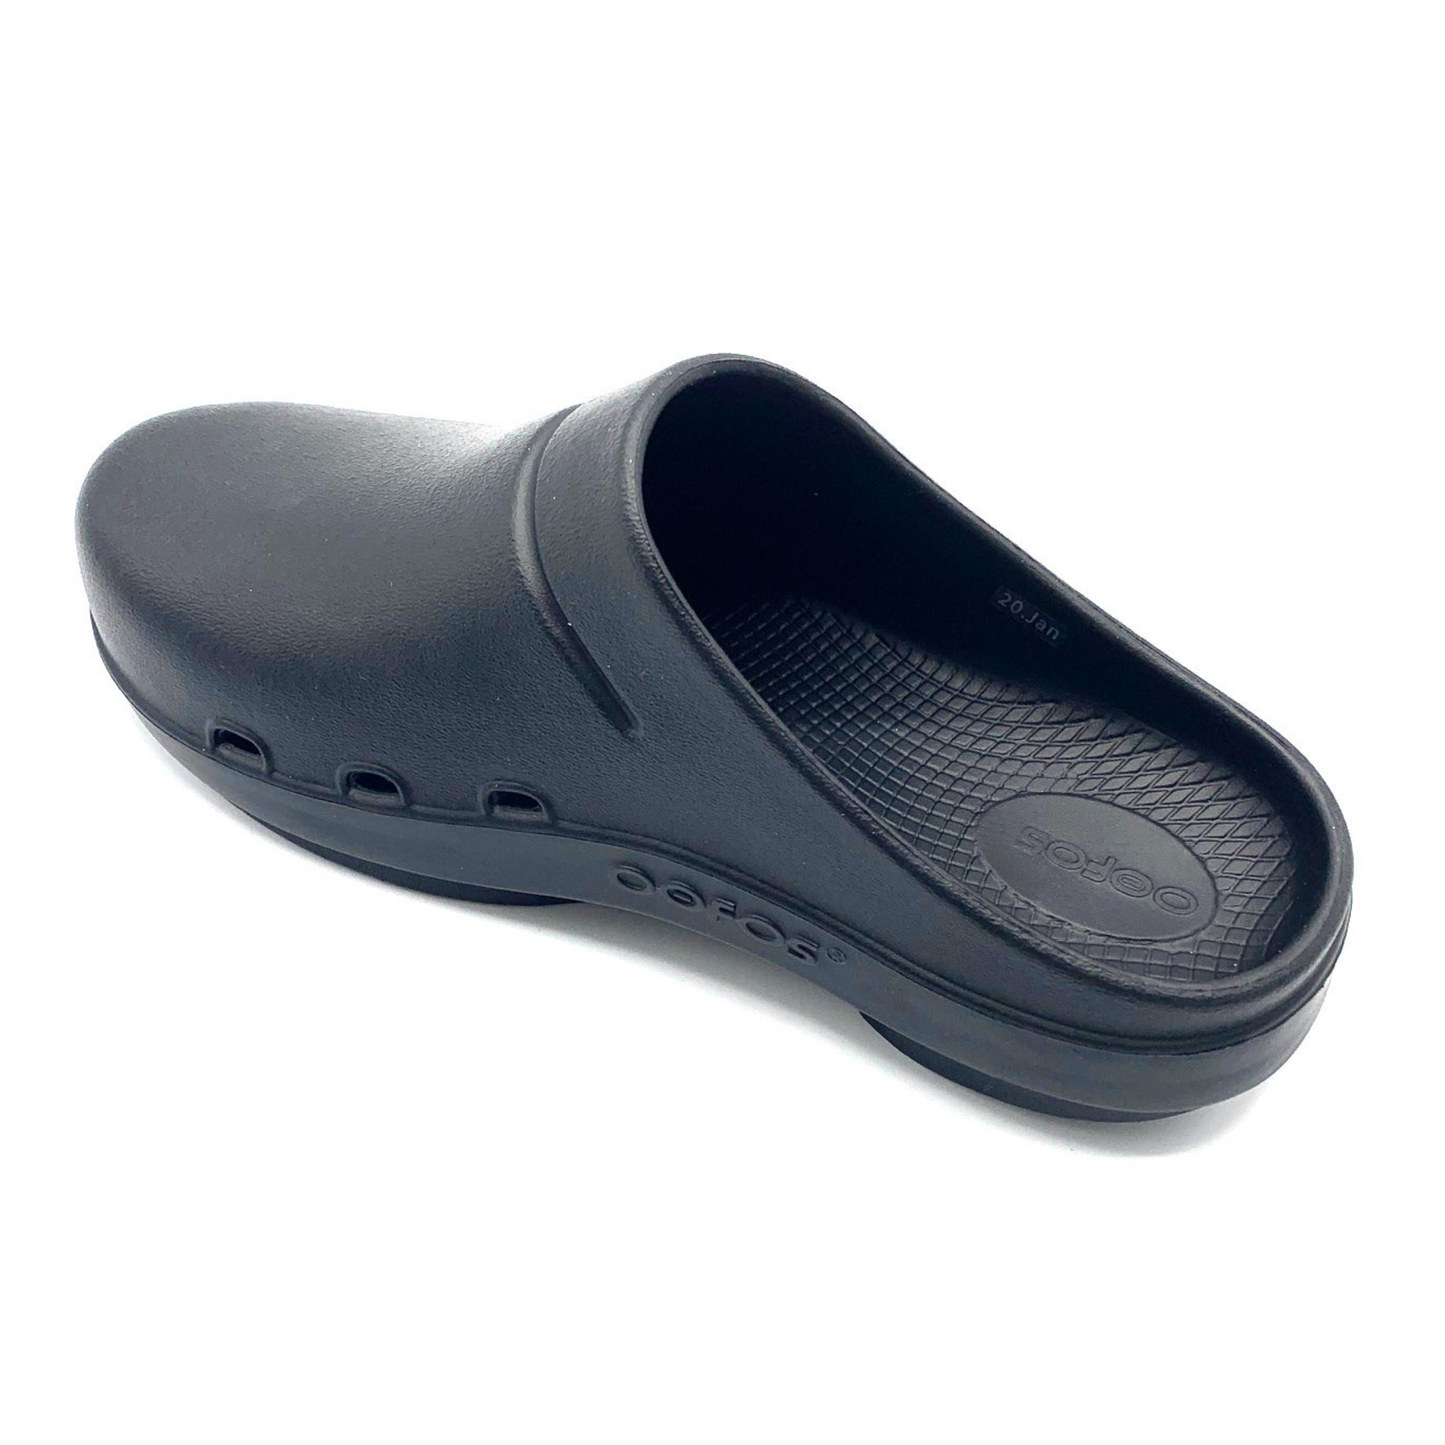 A black clog is pictured at a back angle showing the waffle textured footbed and small side foot cut outs.